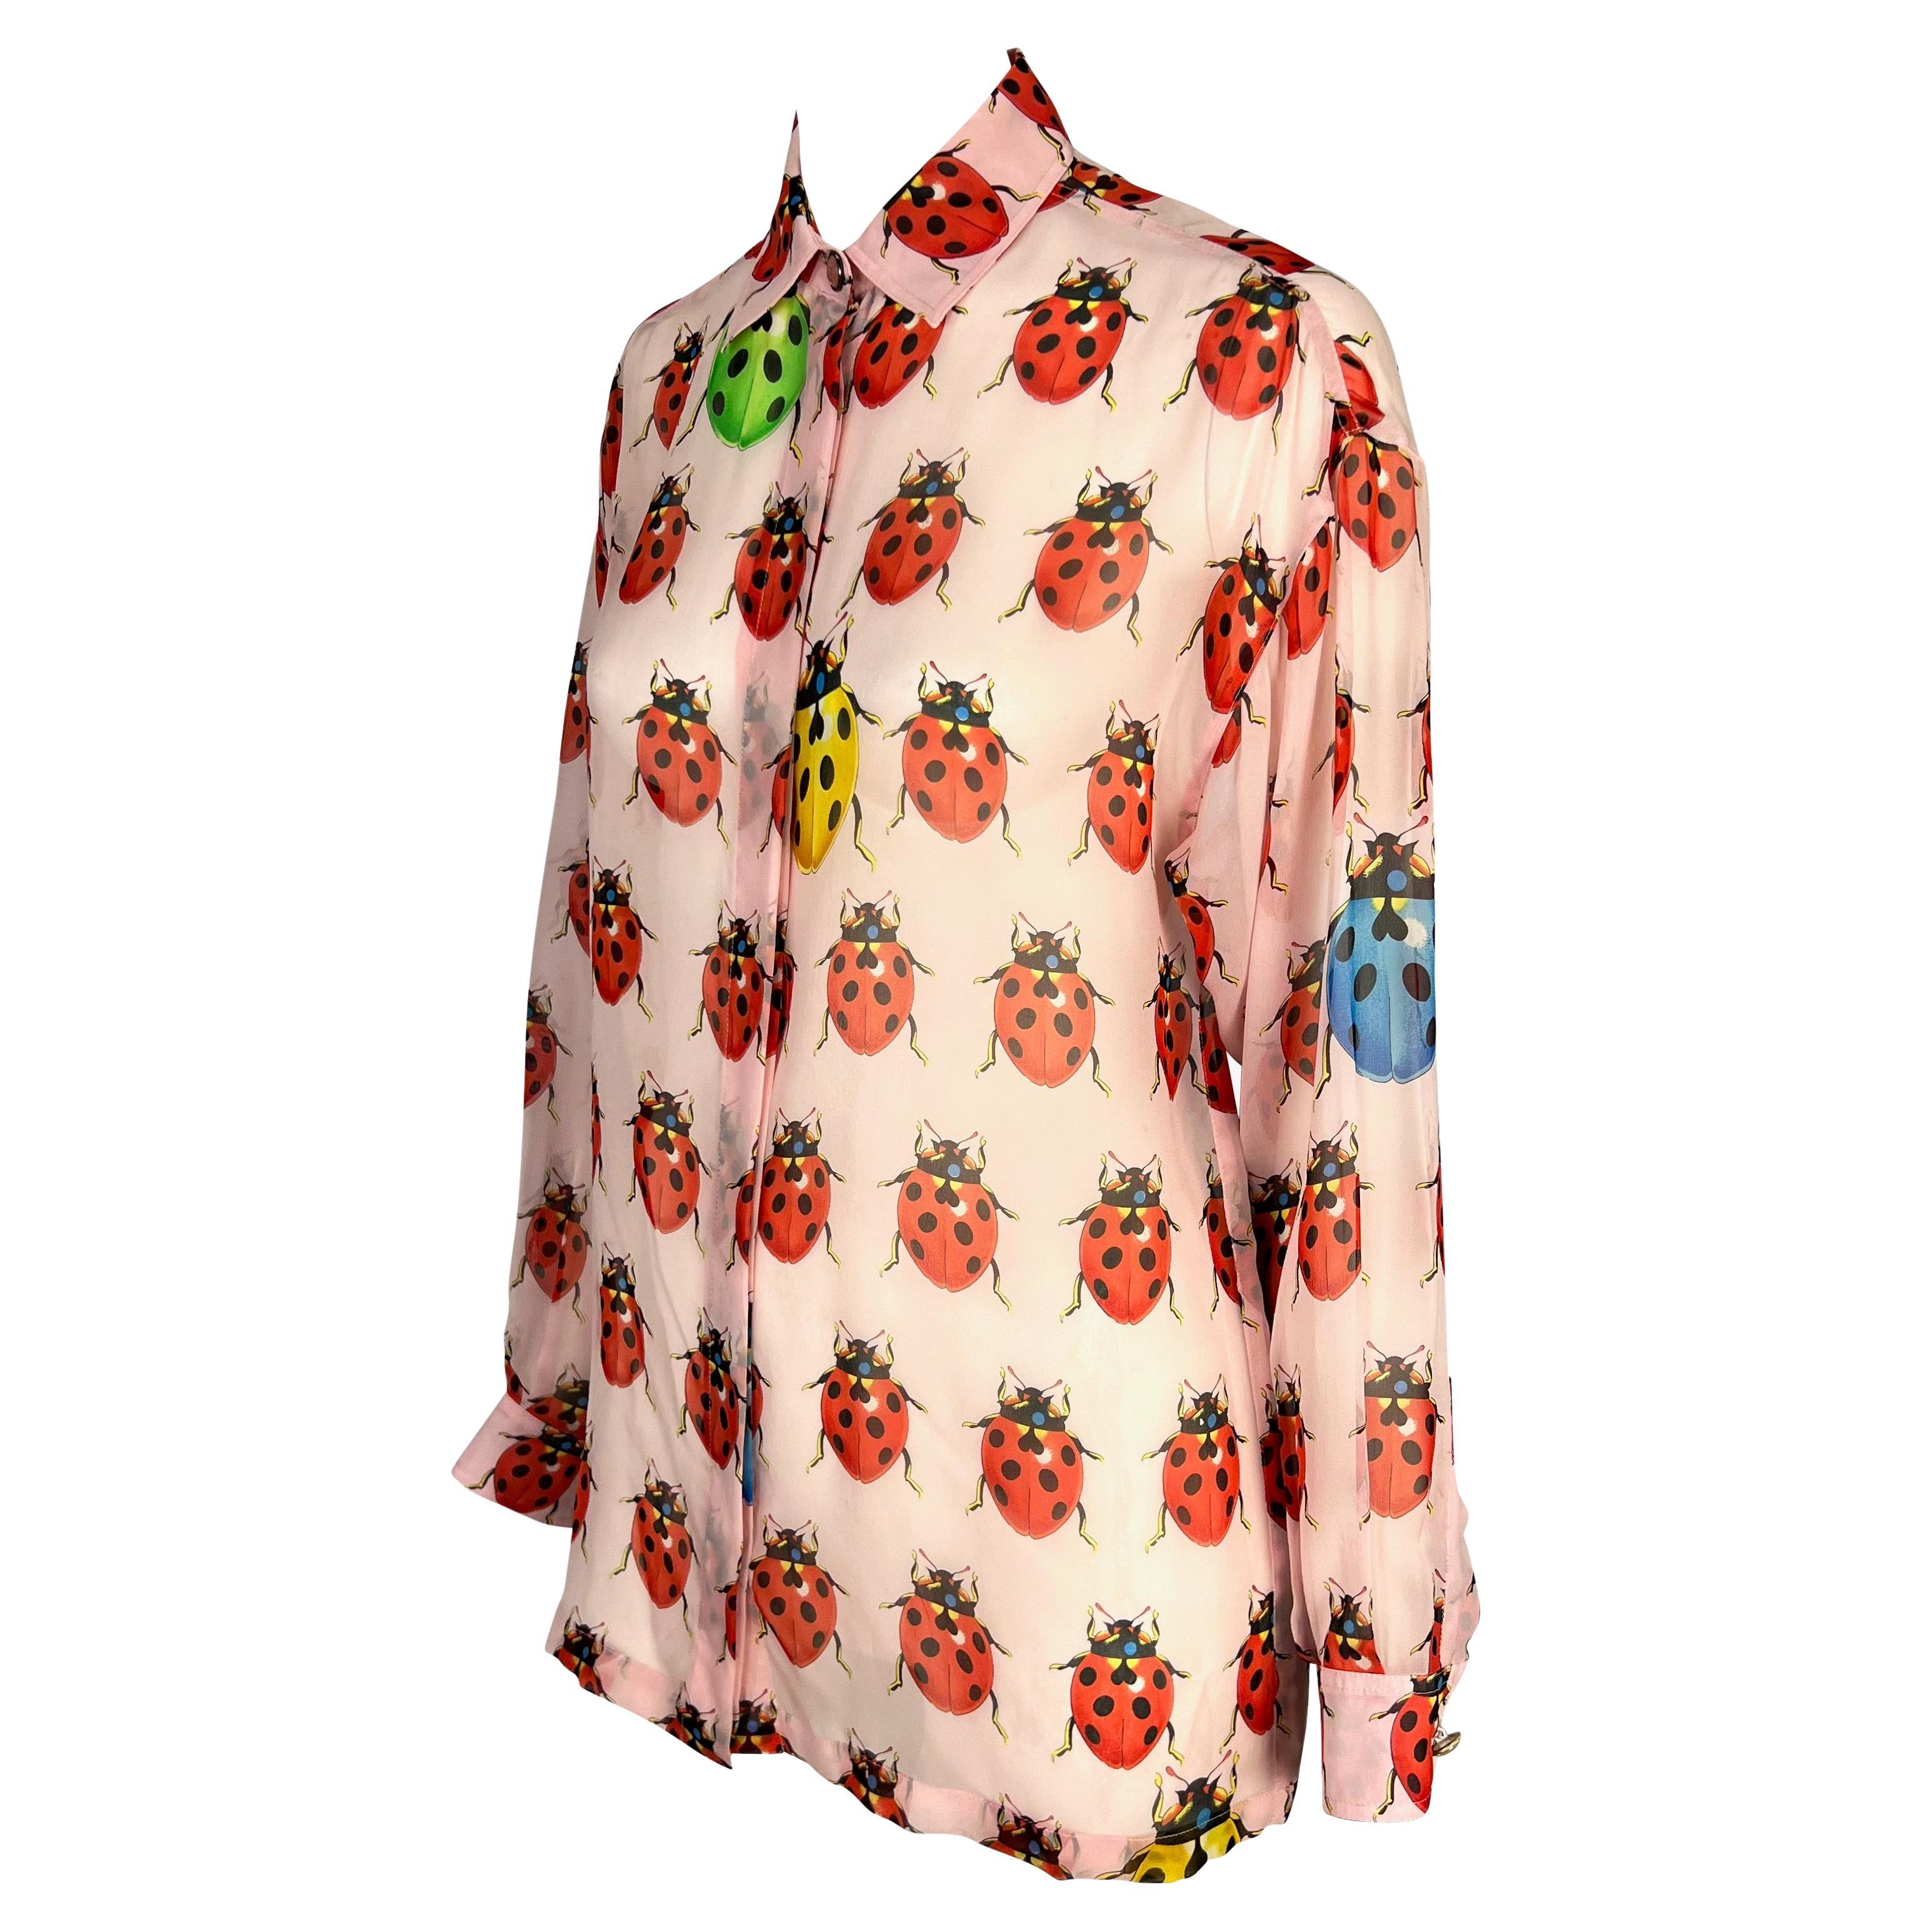 Presenting a light pink ladybug sheer Gianni Versace Couture collared shirt, designed by Gianni Versace. From the Spring/Summer 1995, this ladybug print debuted on the season's runway and quickly became a beloved pattern by the fashion house,